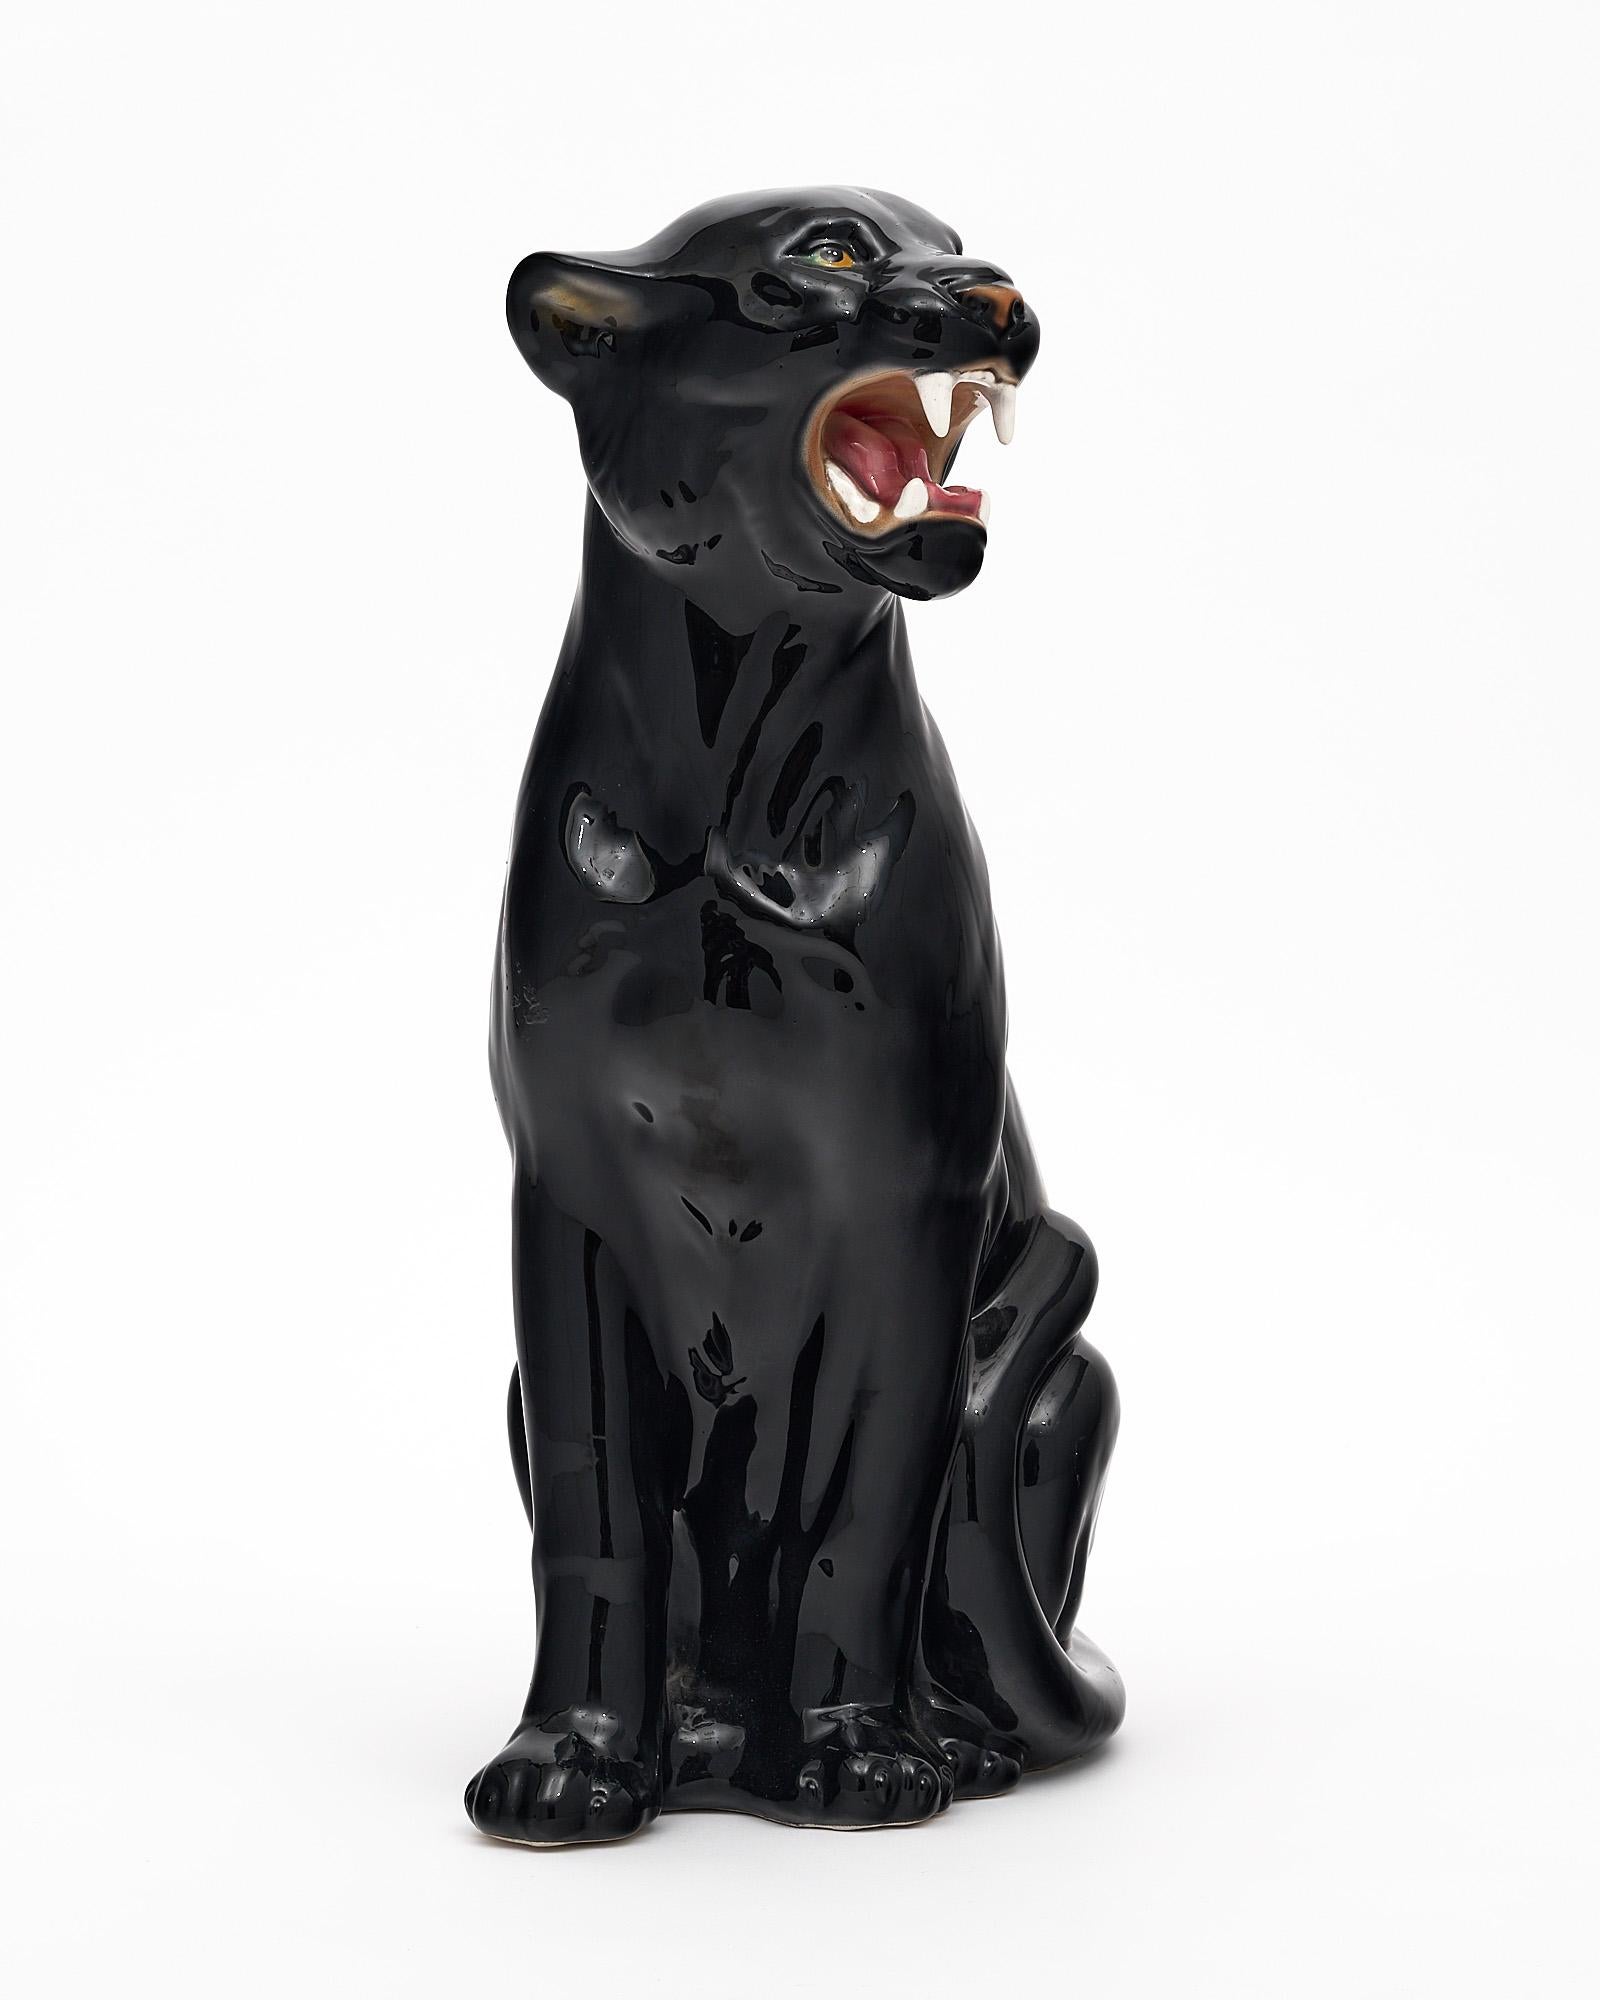 Italian vintage panther sculpture in polychrome ceramic with beautiful emerald colored eyes. The life-like pose and expression are captivating.